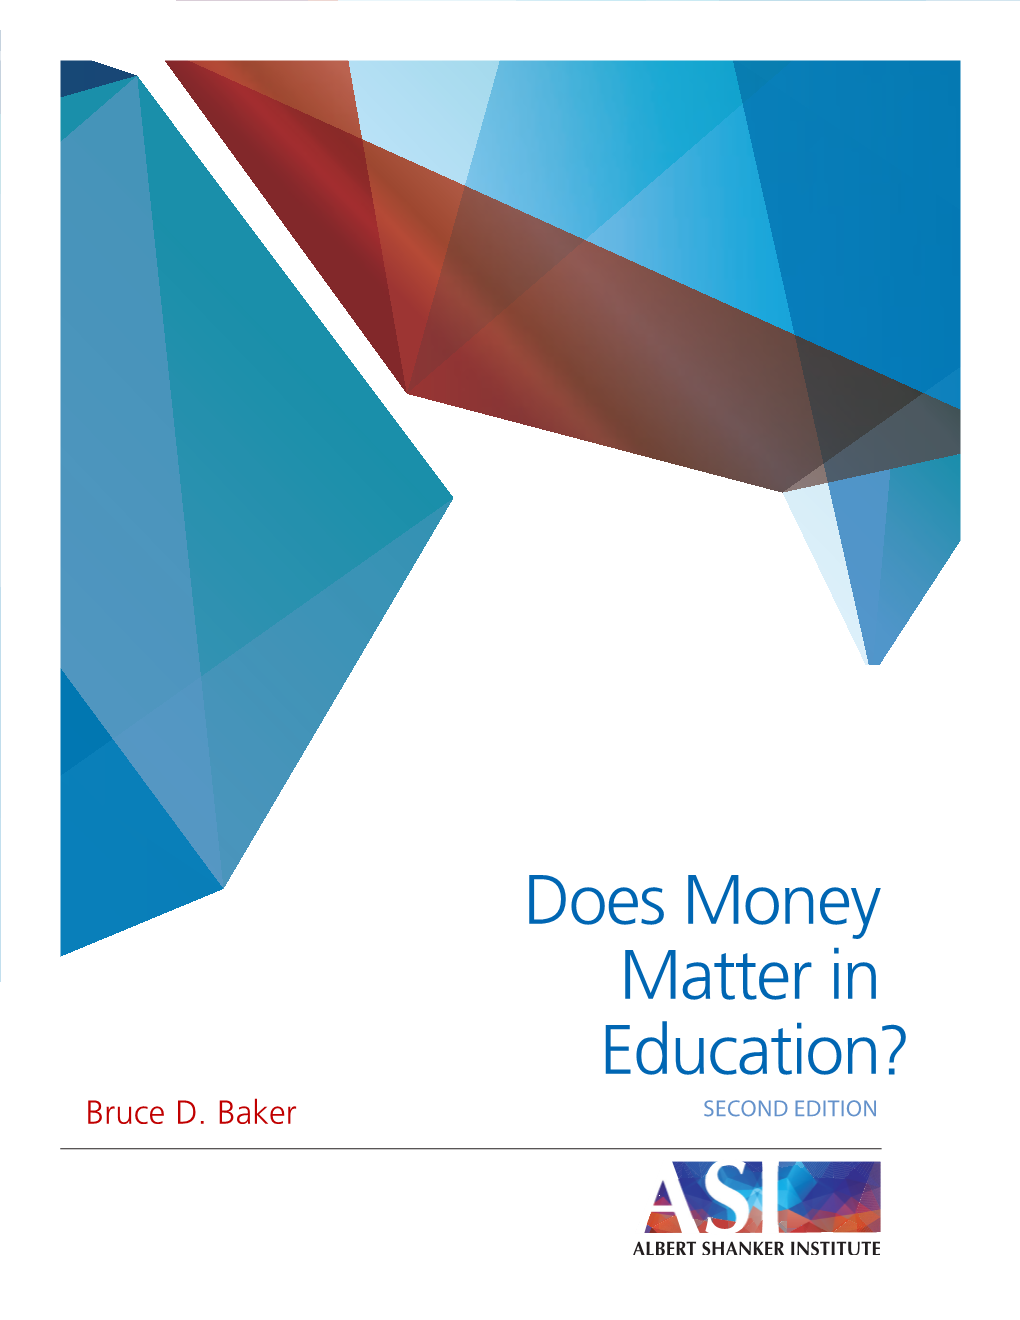 Does Money Matter in Education? Bruce D